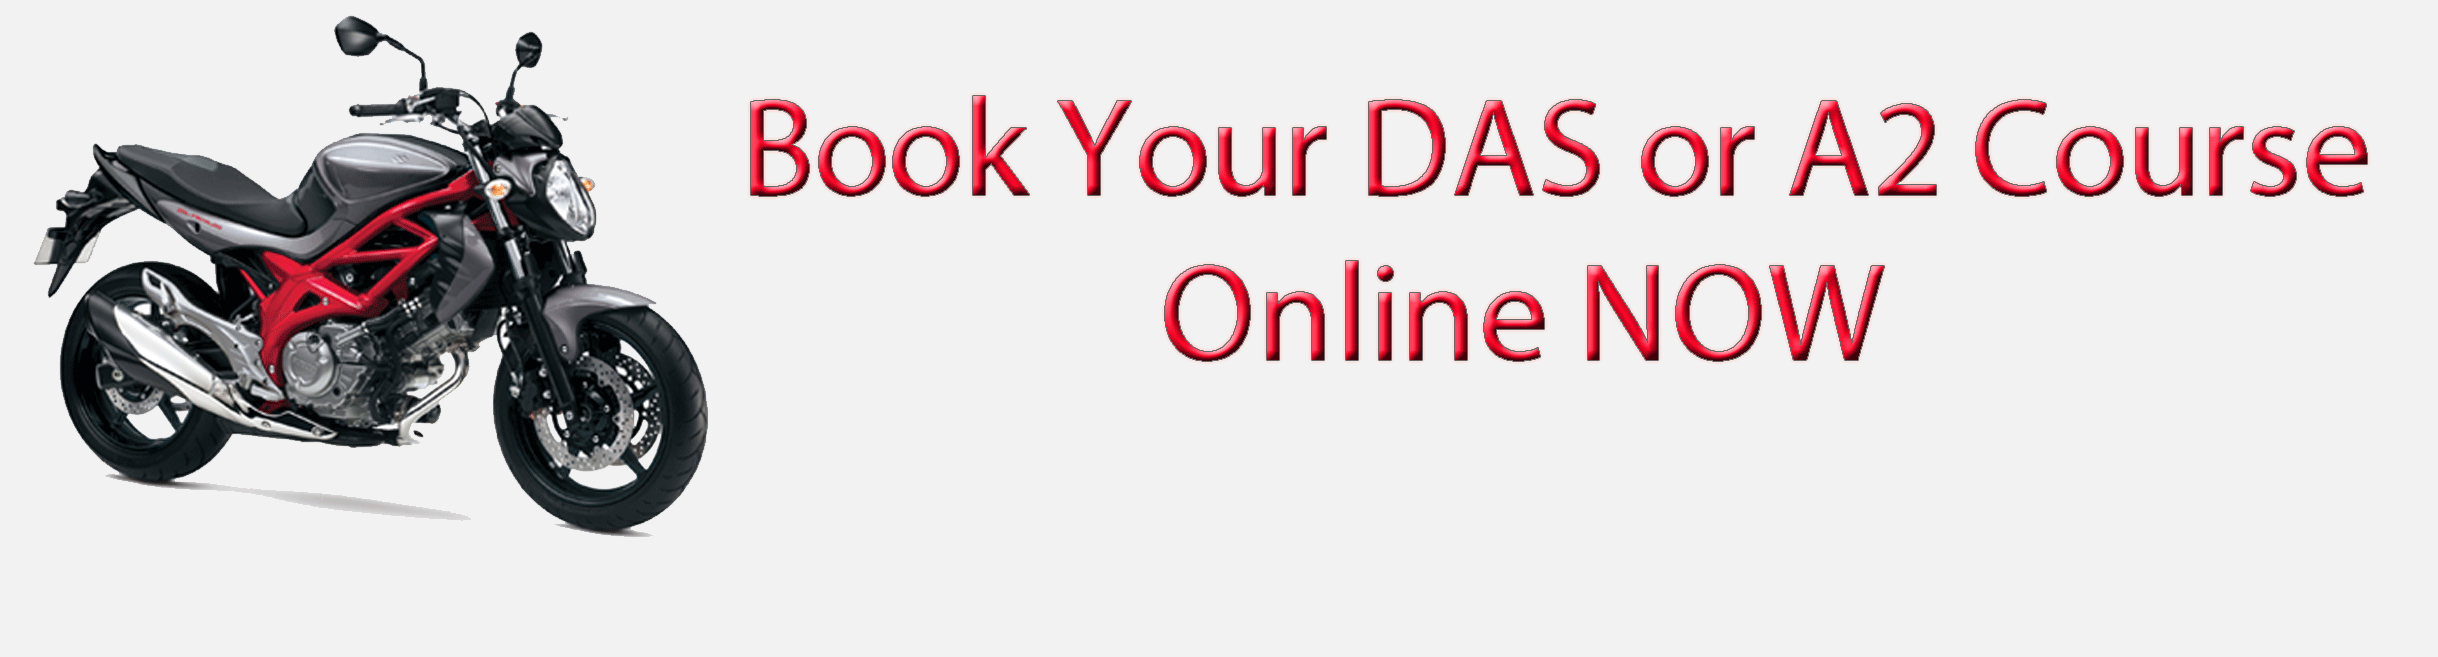 DAS & A2 Courses Now Available to Book Online